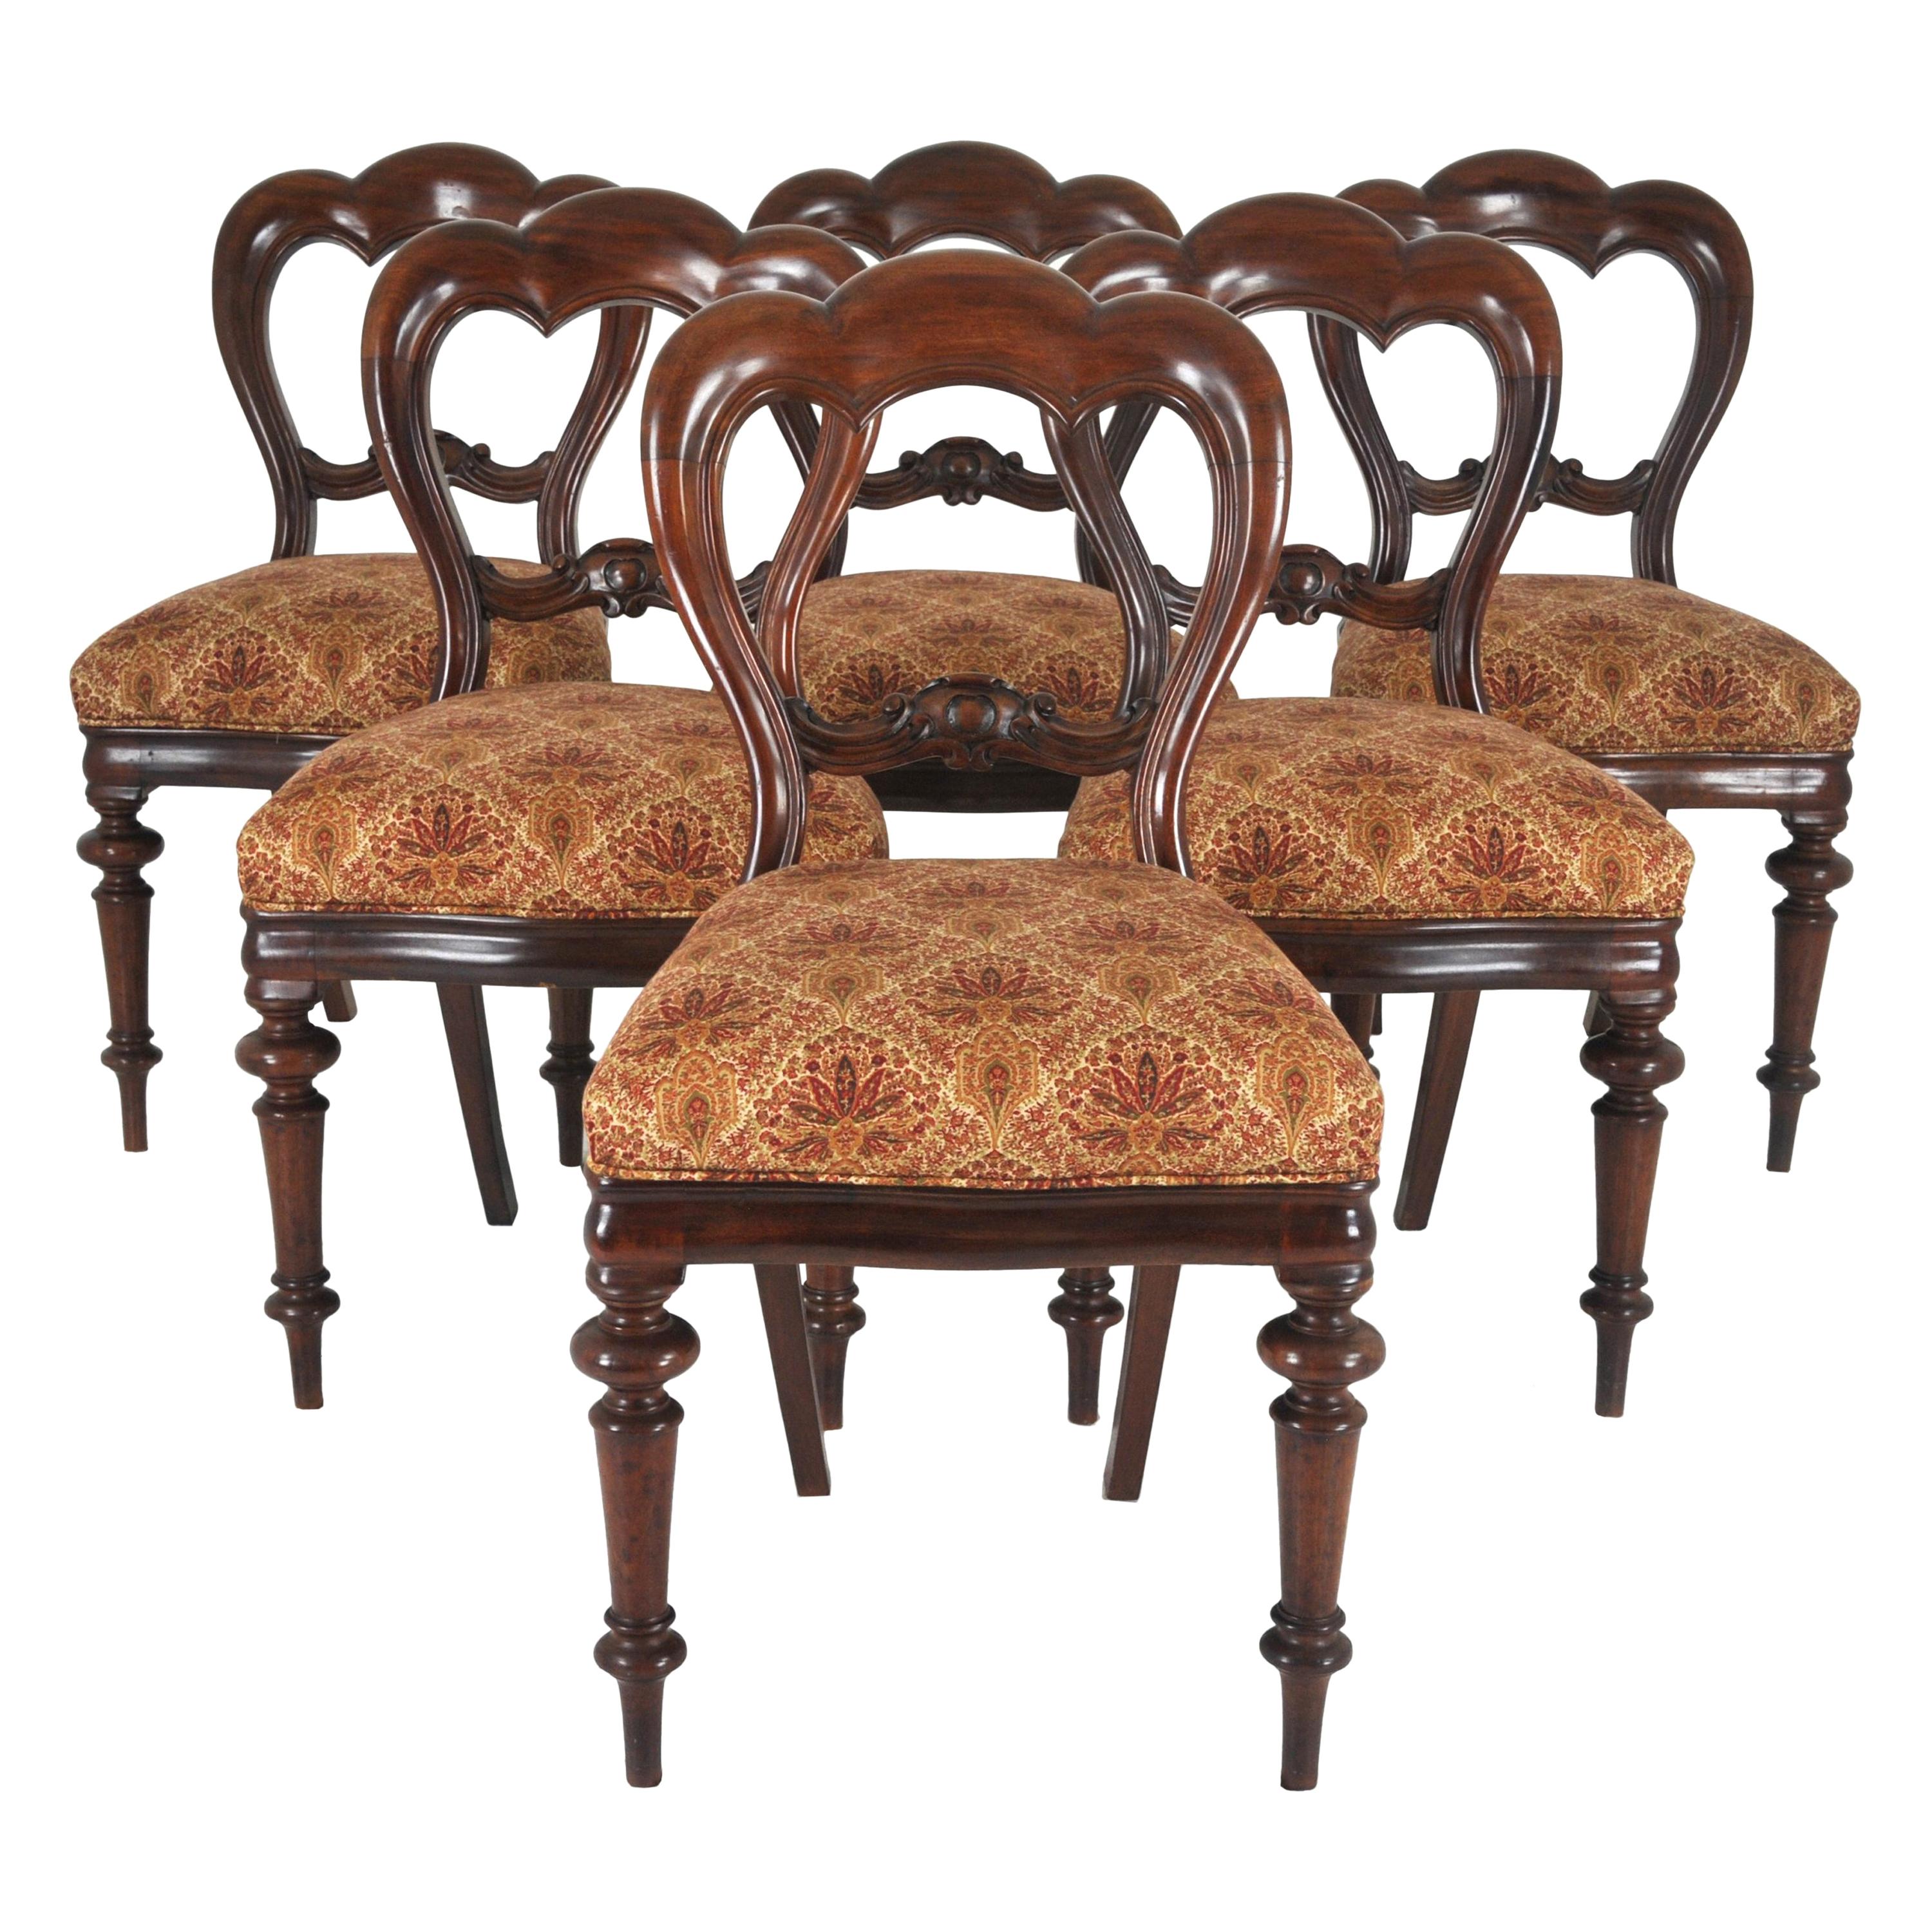 Antique Dining Chairs, Victorian, Balloon Back, Walnut, Set of Six, 1860, B830